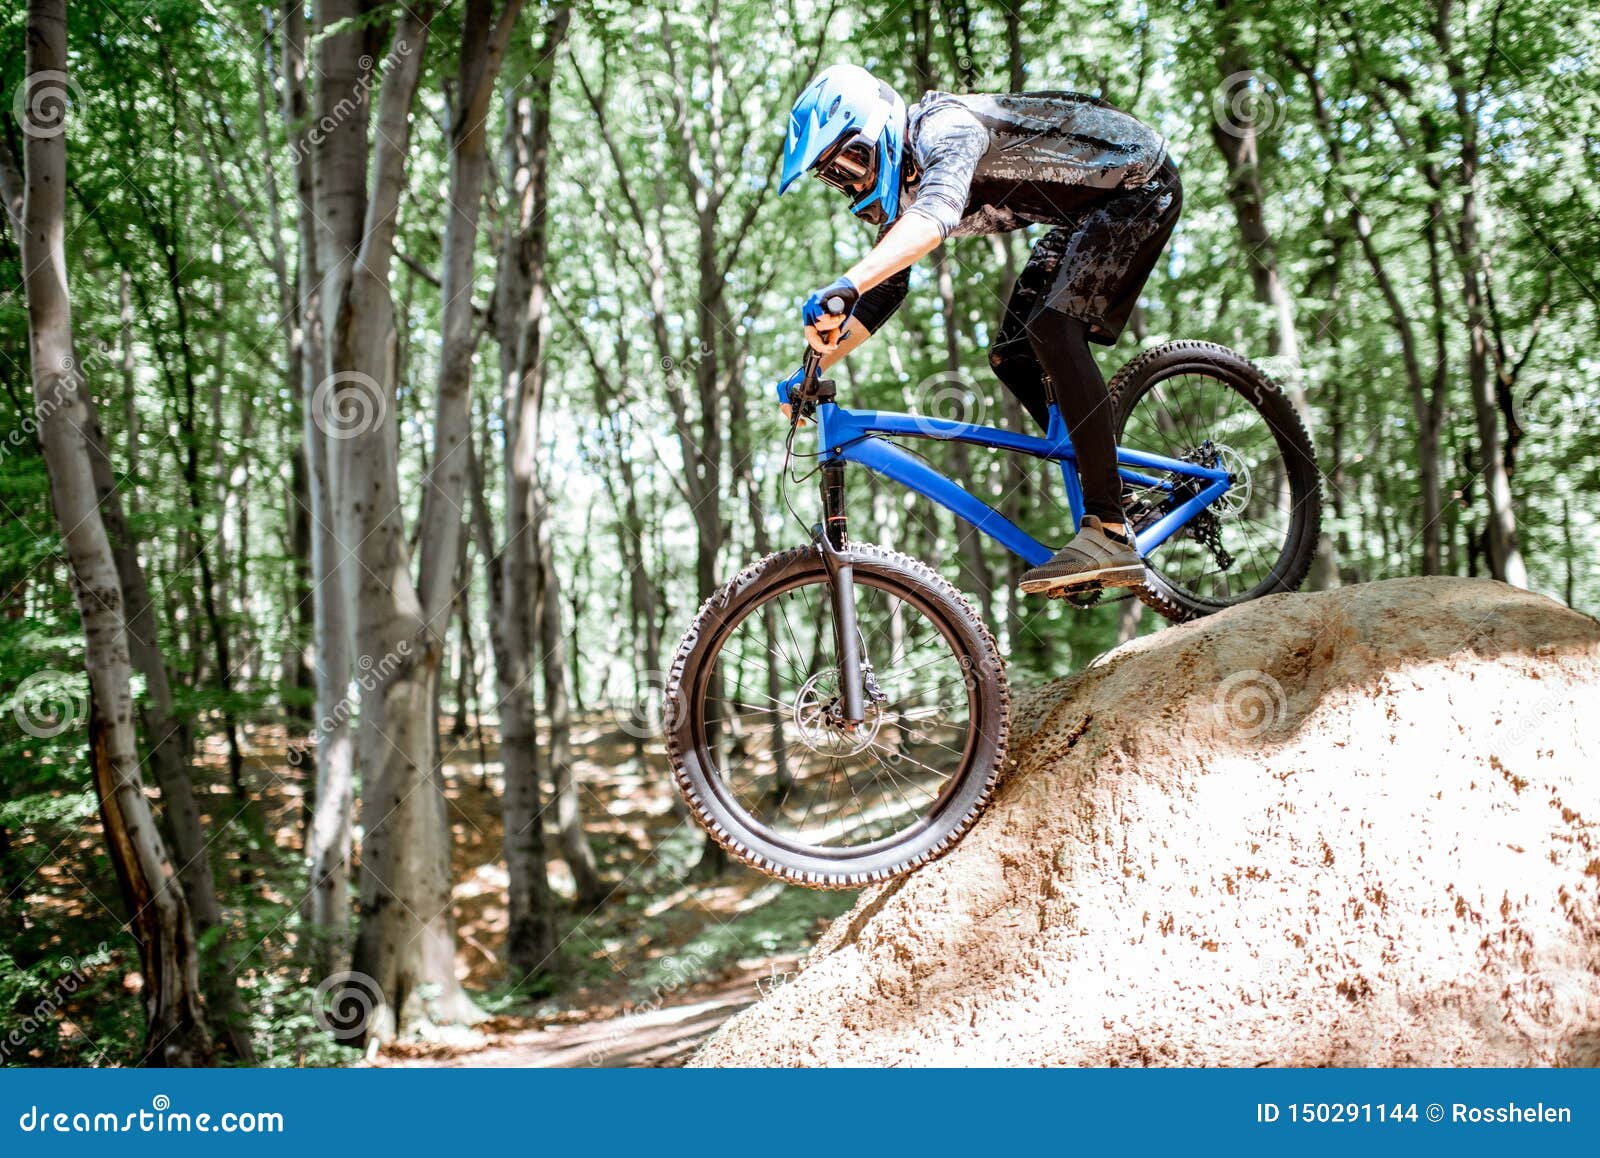 Cyclist Riding Extremely in the Forest Stock Photo - Image of blue ...